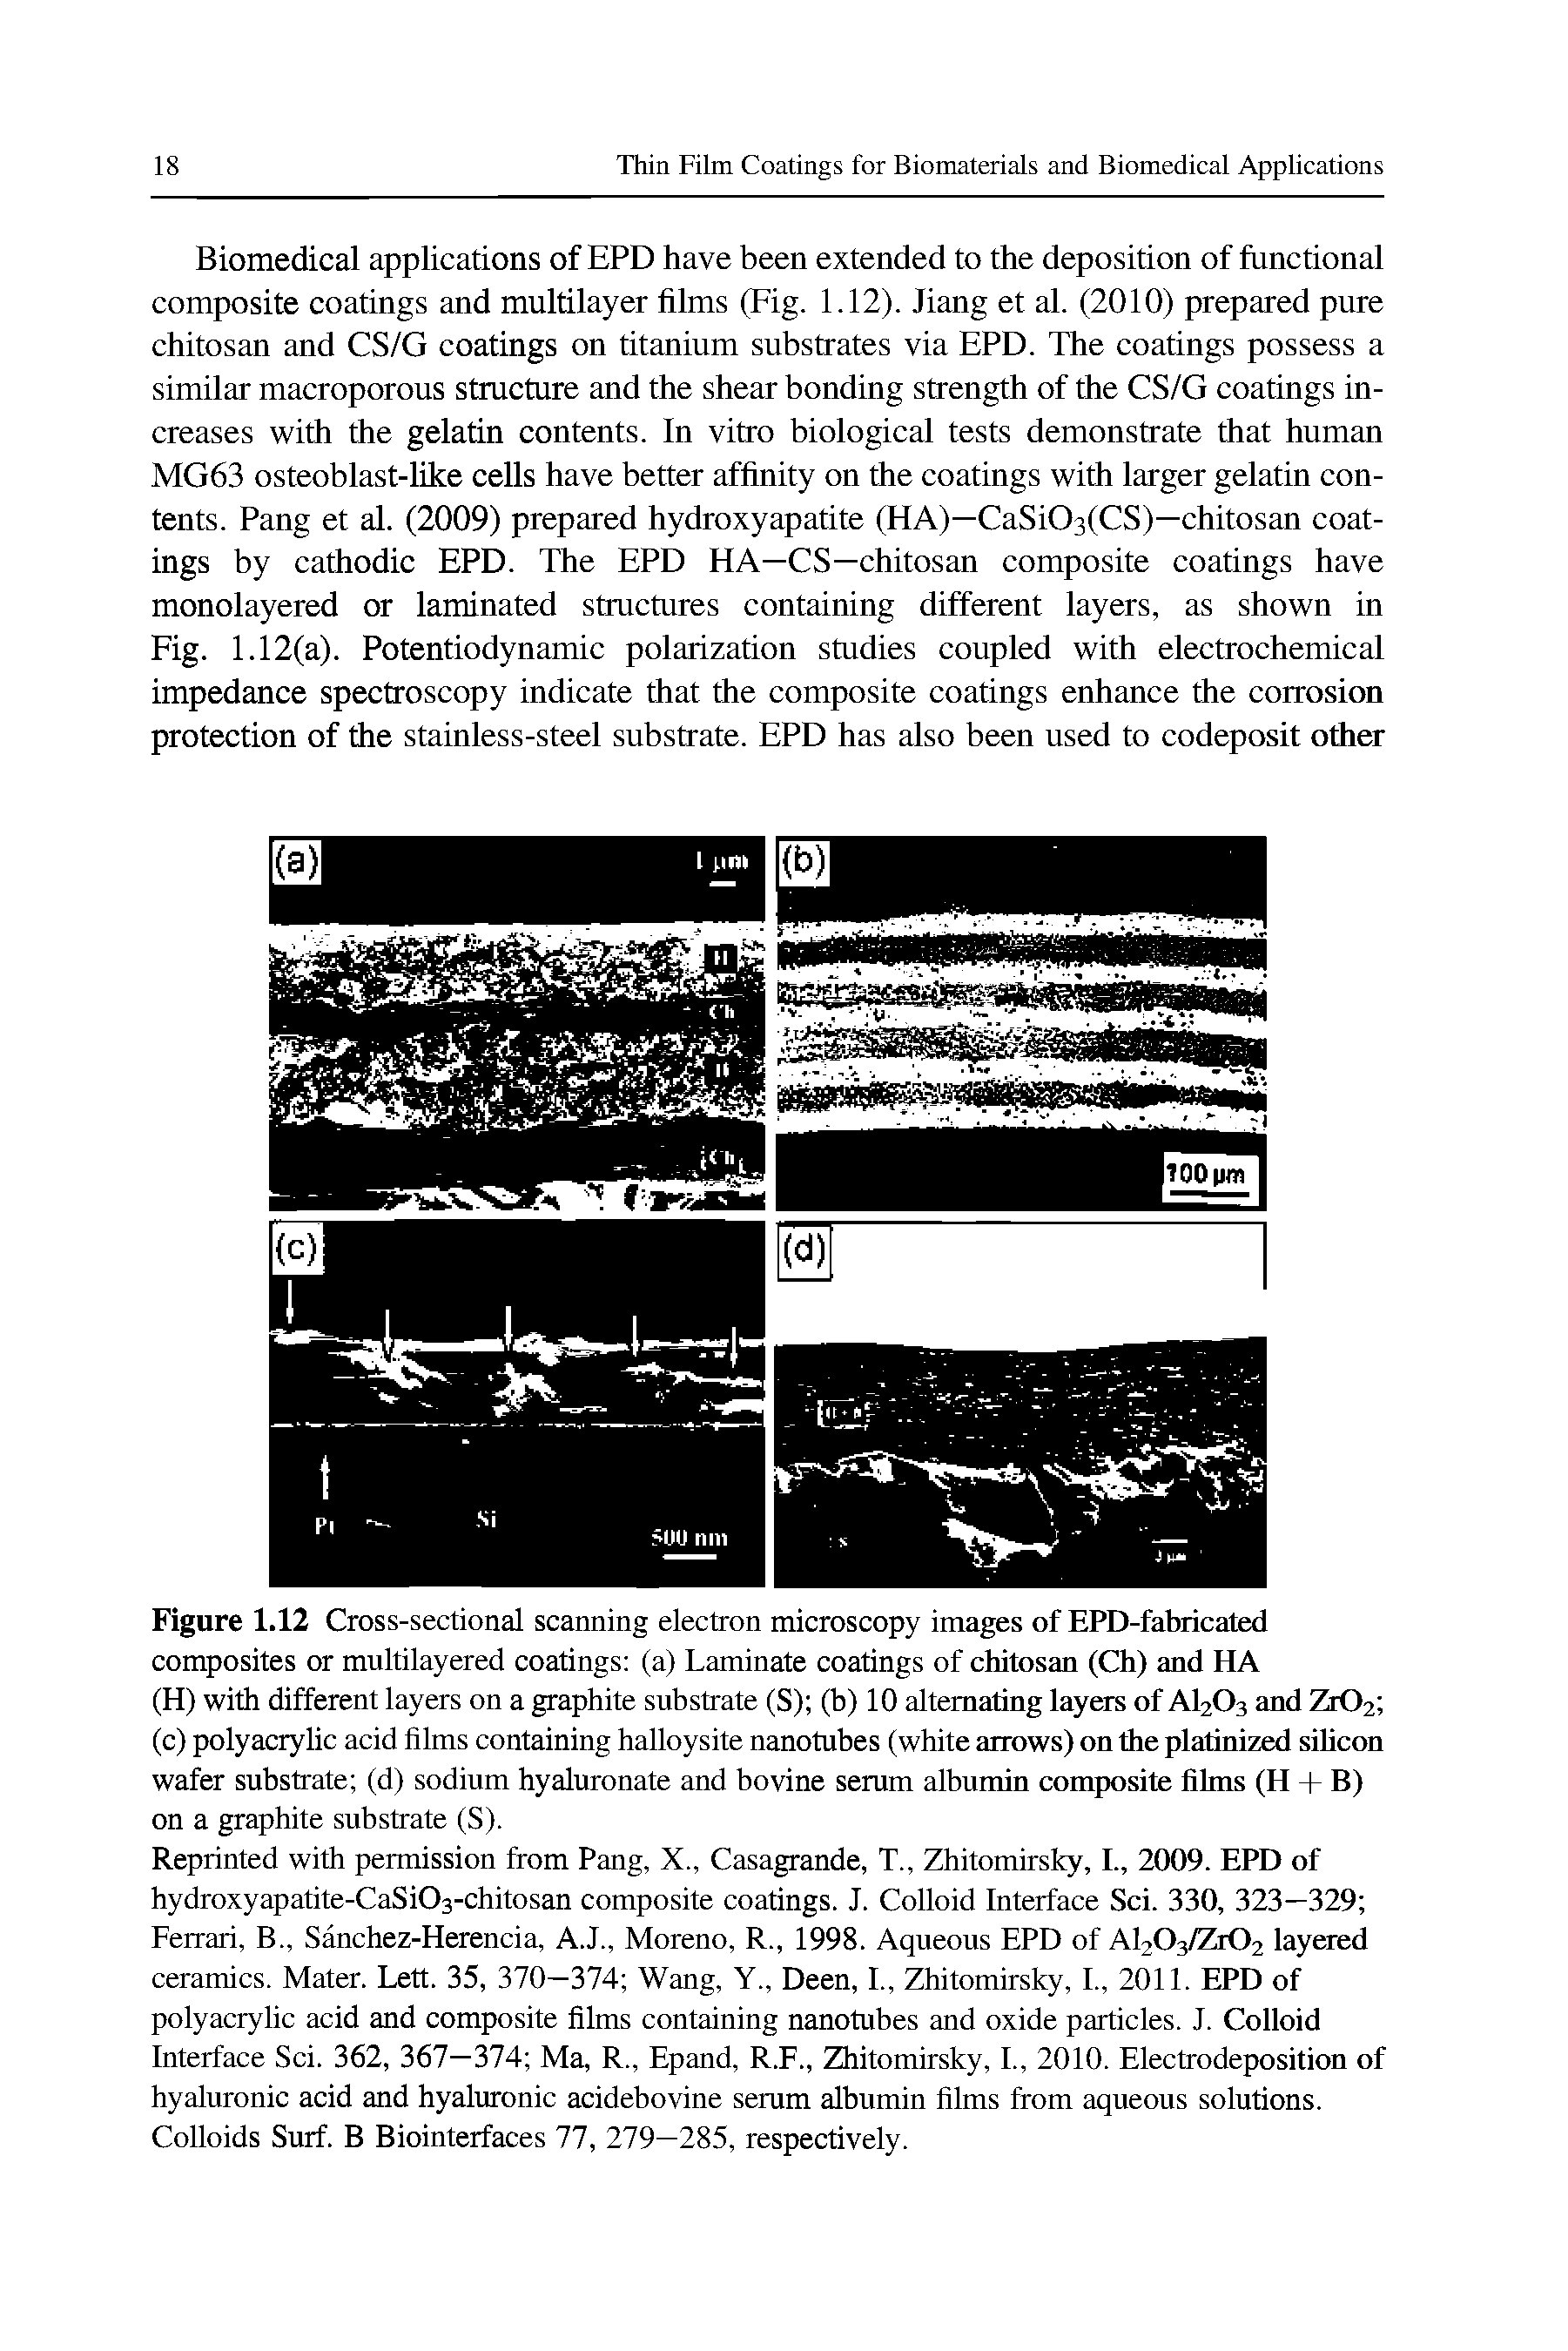 Figure 1.12 Cross-sectional scanning electron microscopy images of EPD-fabricated composites or multilayered coatings (a) Laminate coatings of chitosan (Ch) and HA (H) with different layers on a graphite substrate (S) (b) 10 alternating layers of AI2O3 and Zr02 (c) polyacrylic acid films containing halloysite nanotubes (white arrows) on the platinized sihcon wafer substrate (d) sodium hyaluronate and bovine serum albumin composite films (H + B) on a graphite substrate (S).